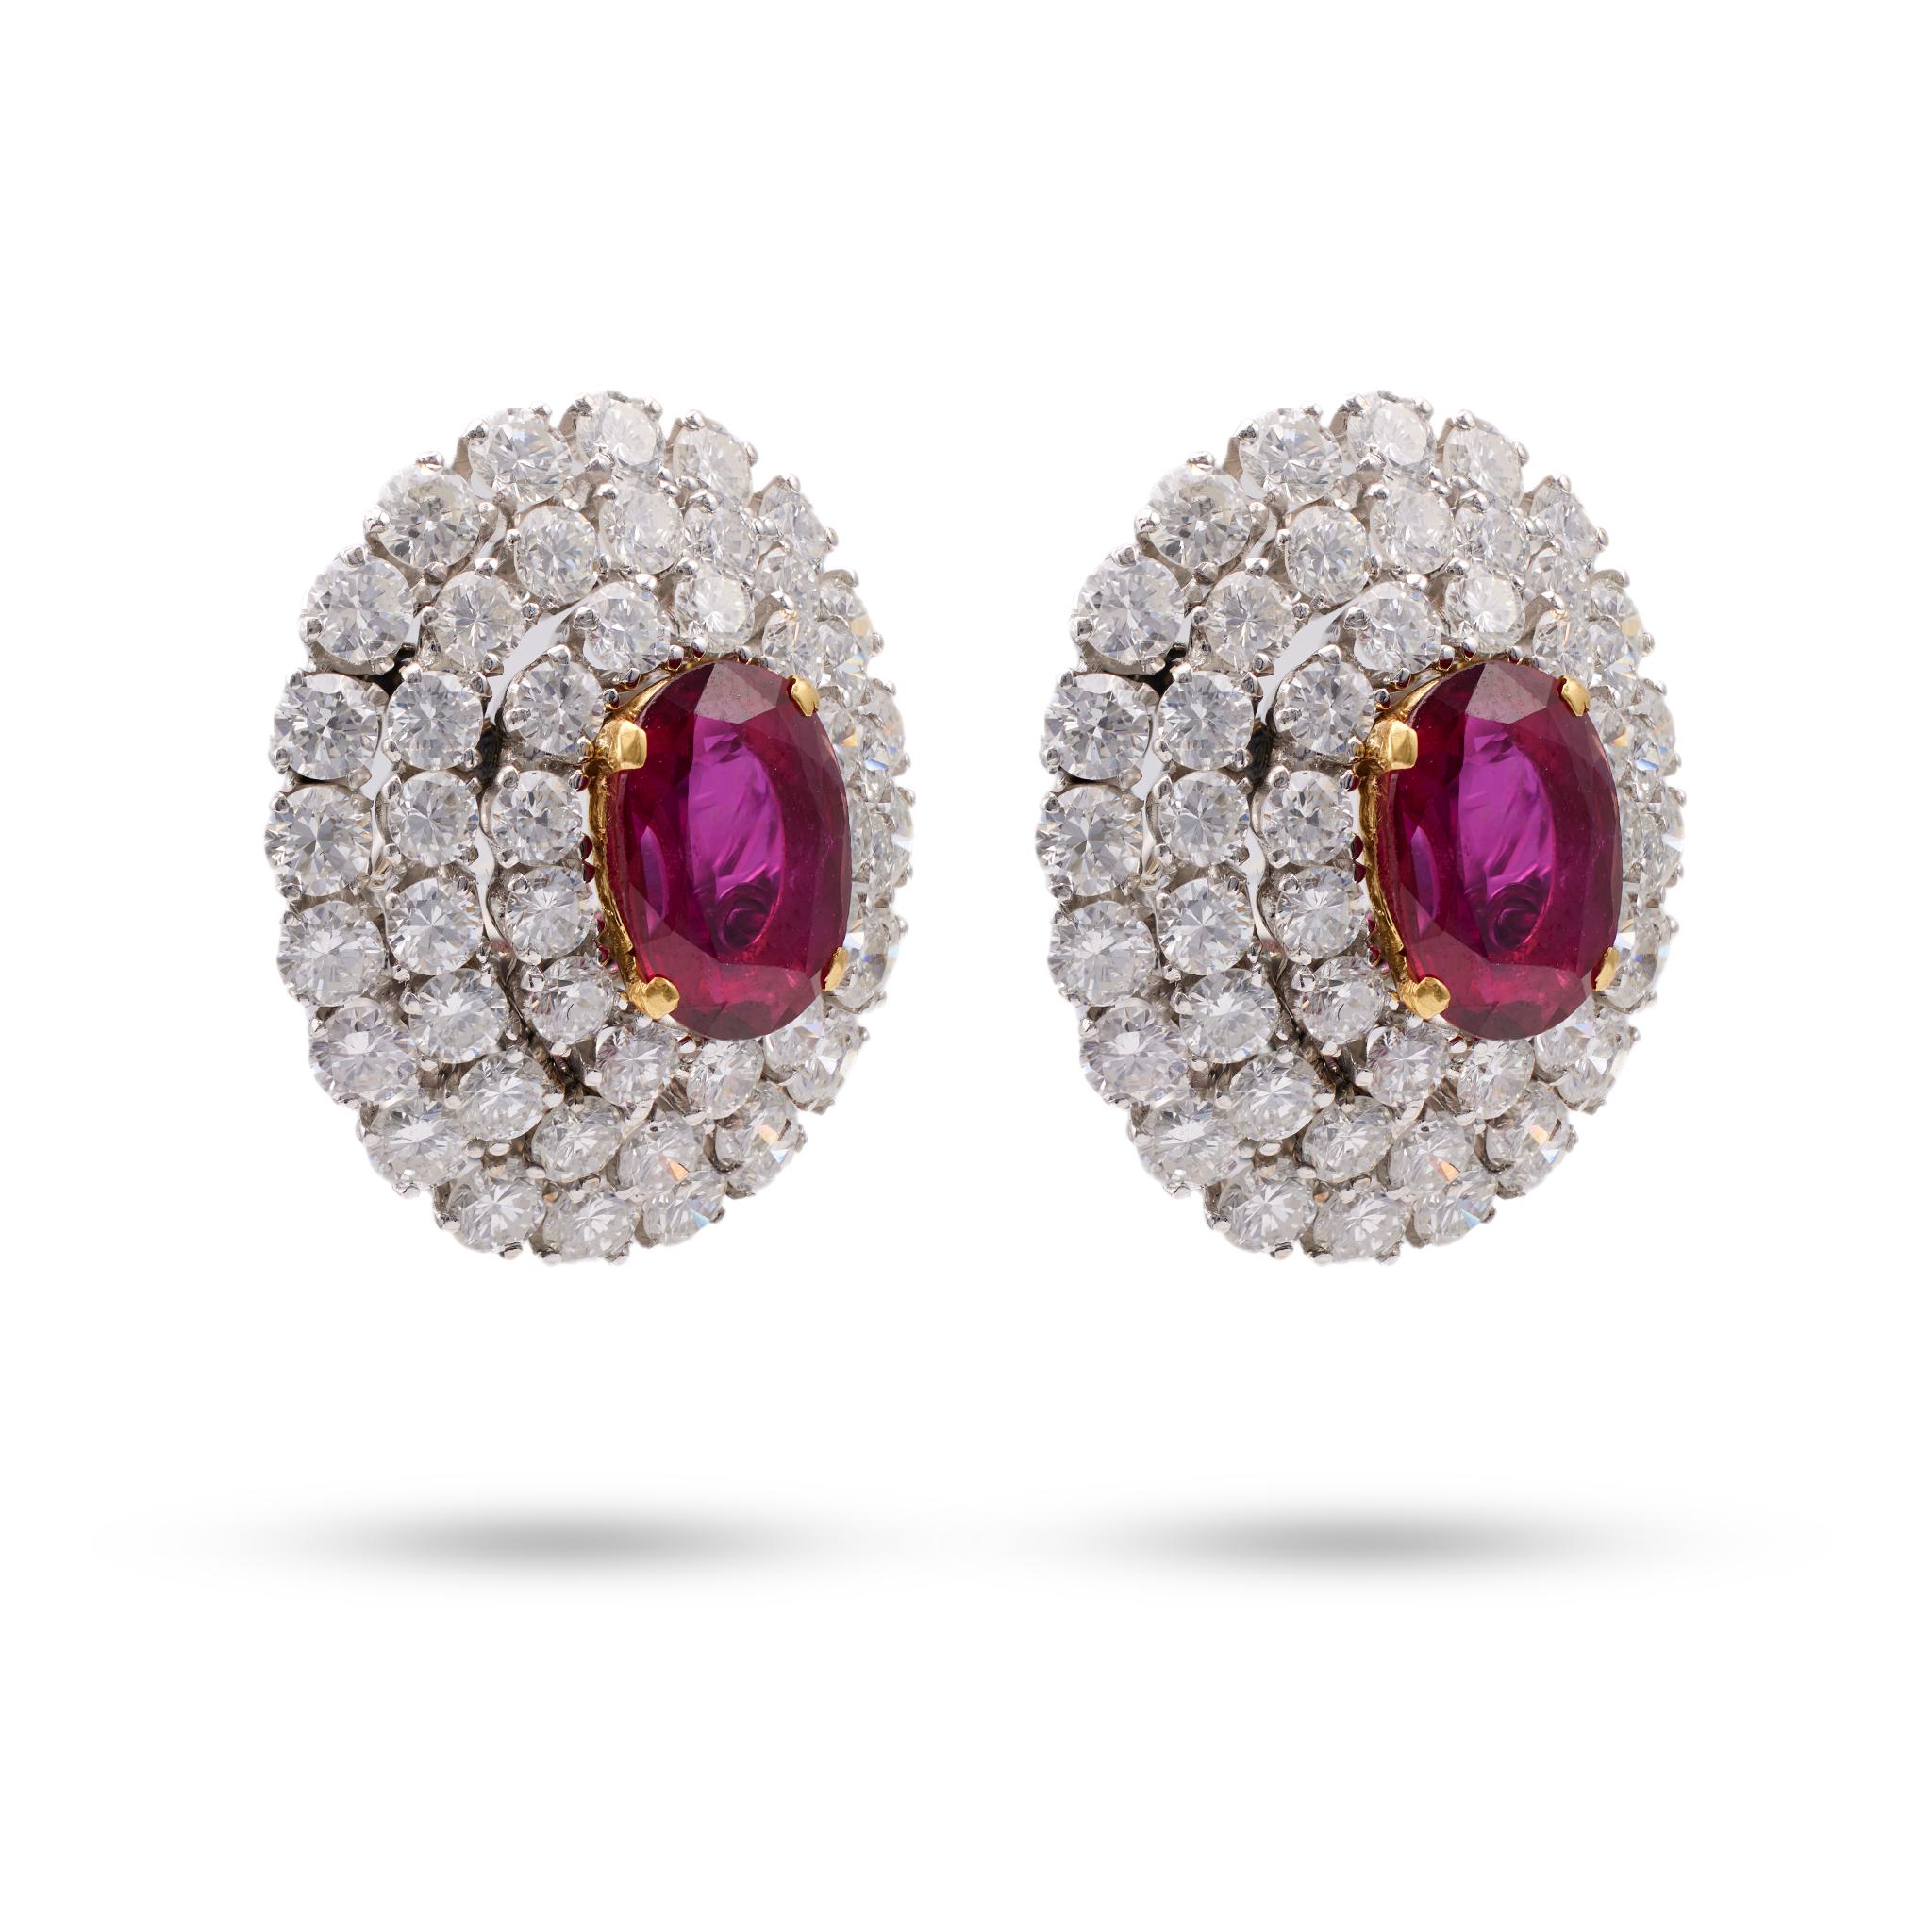 Vintage GIA Thai No Heat Ruby Diamond 18k Gold Earrings In Excellent Condition For Sale In Beverly Hills, CA